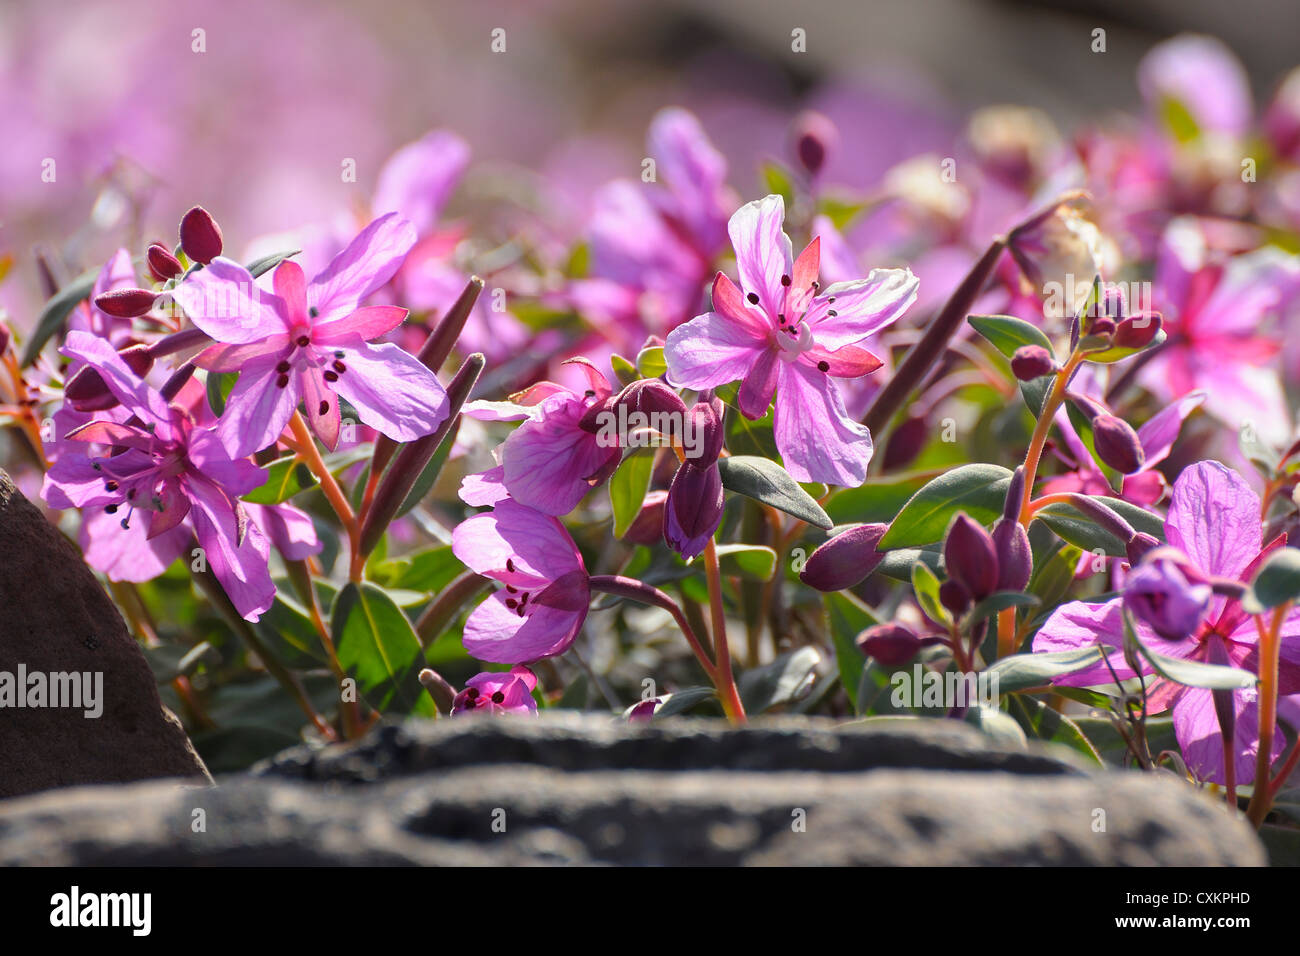 Broad-Leaved Willowherb, Romer Fjord, East Greenland, Greenland Stock Photo